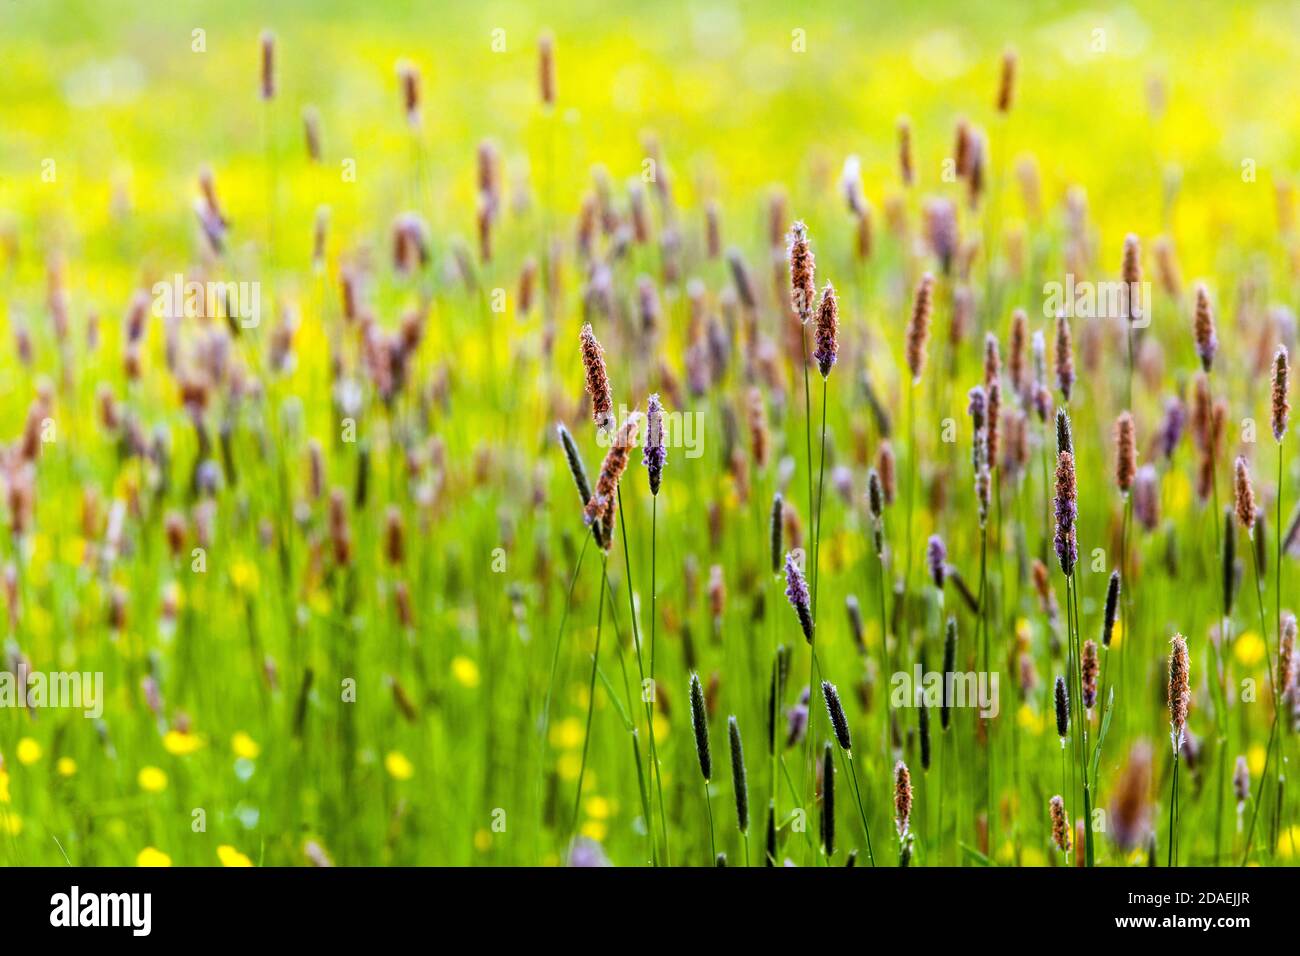 Long grass Meadow foxtail grass growing on spring season grasses of field Stock Photo